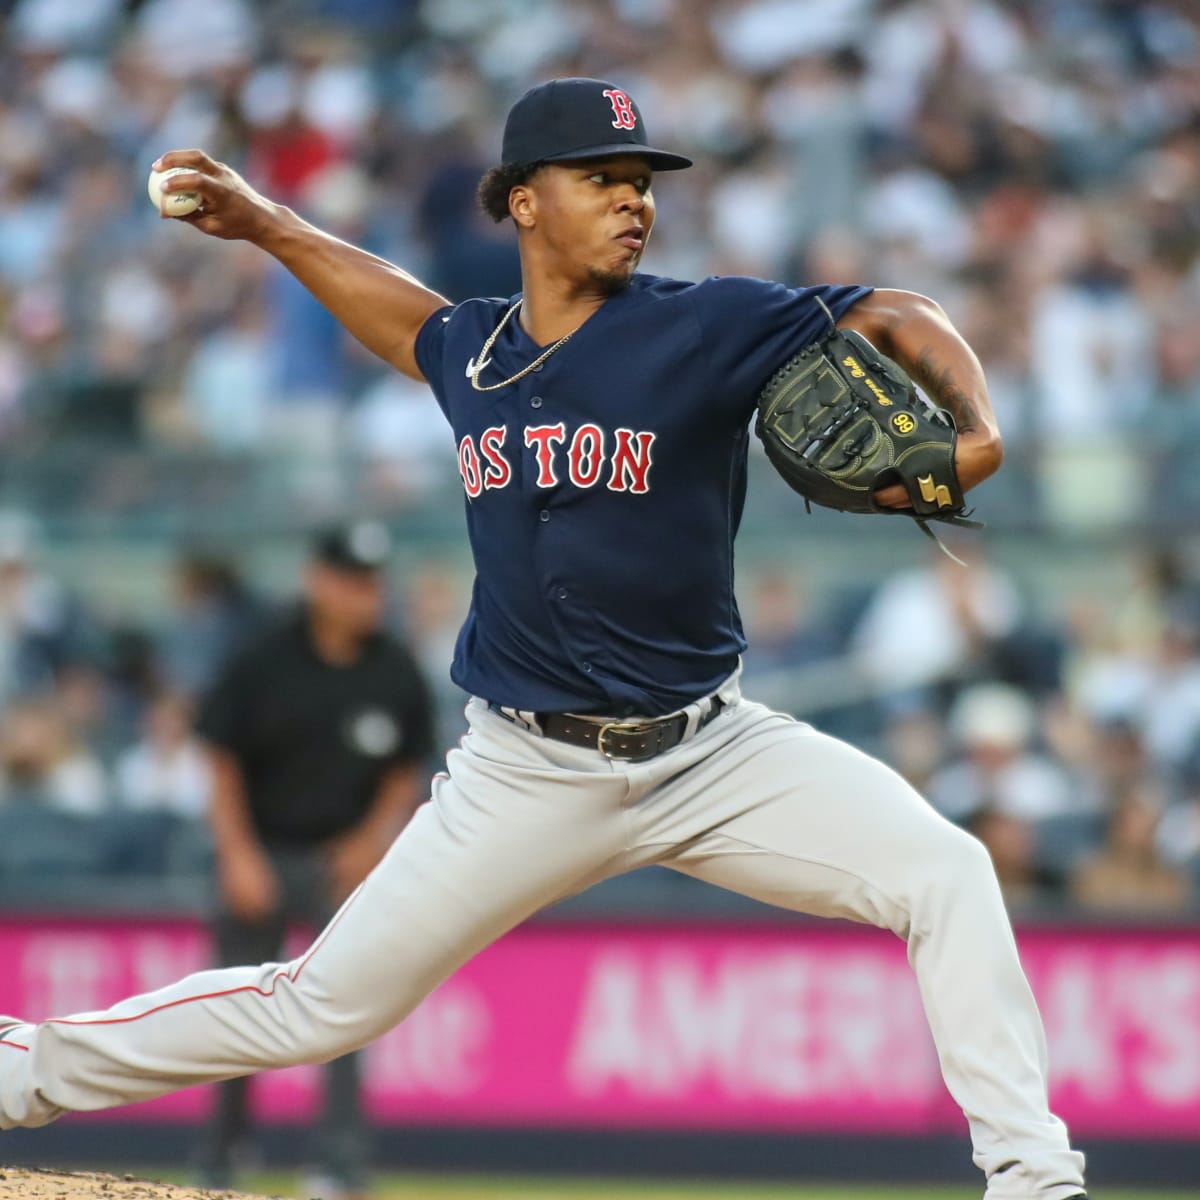 Brayan Bello pitches into 7th inning as the Boston Red Sox beat